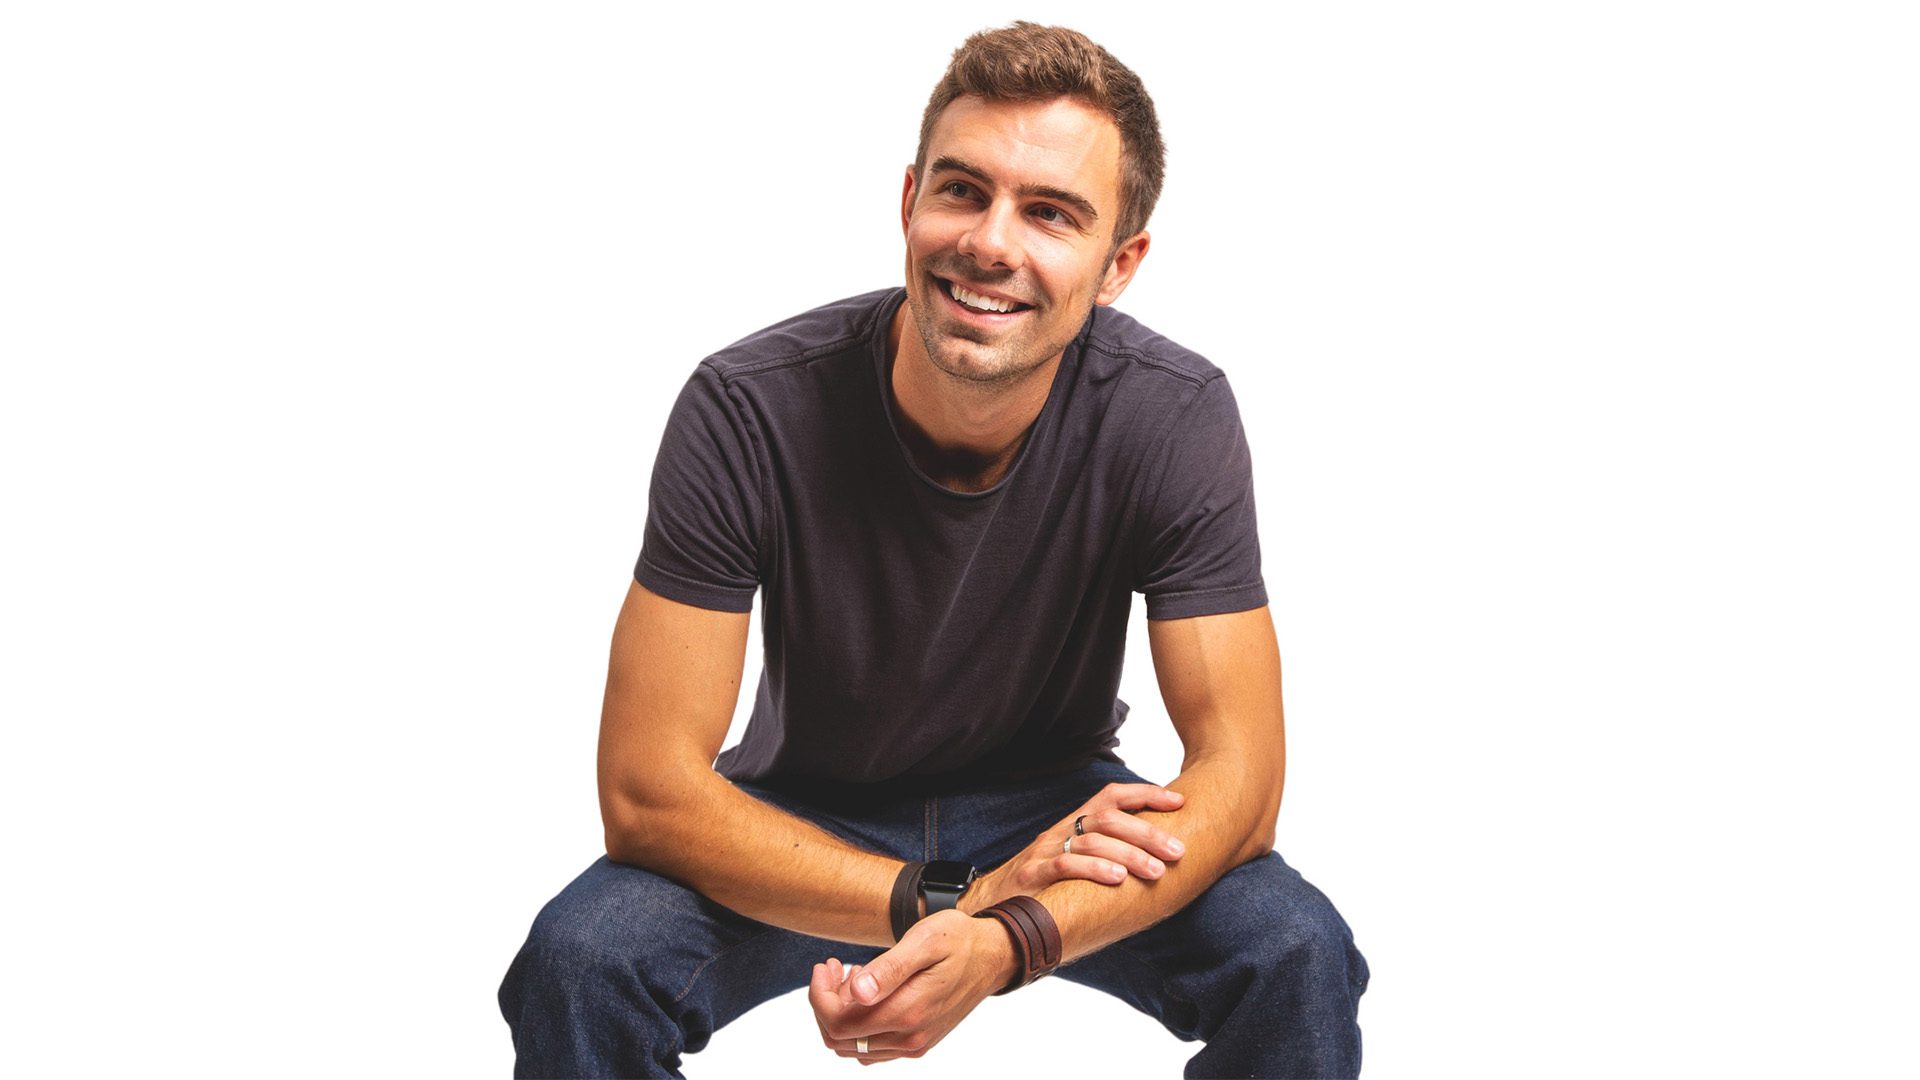 Kevin Martin, the co-founder of the sustainable jeans company unspun